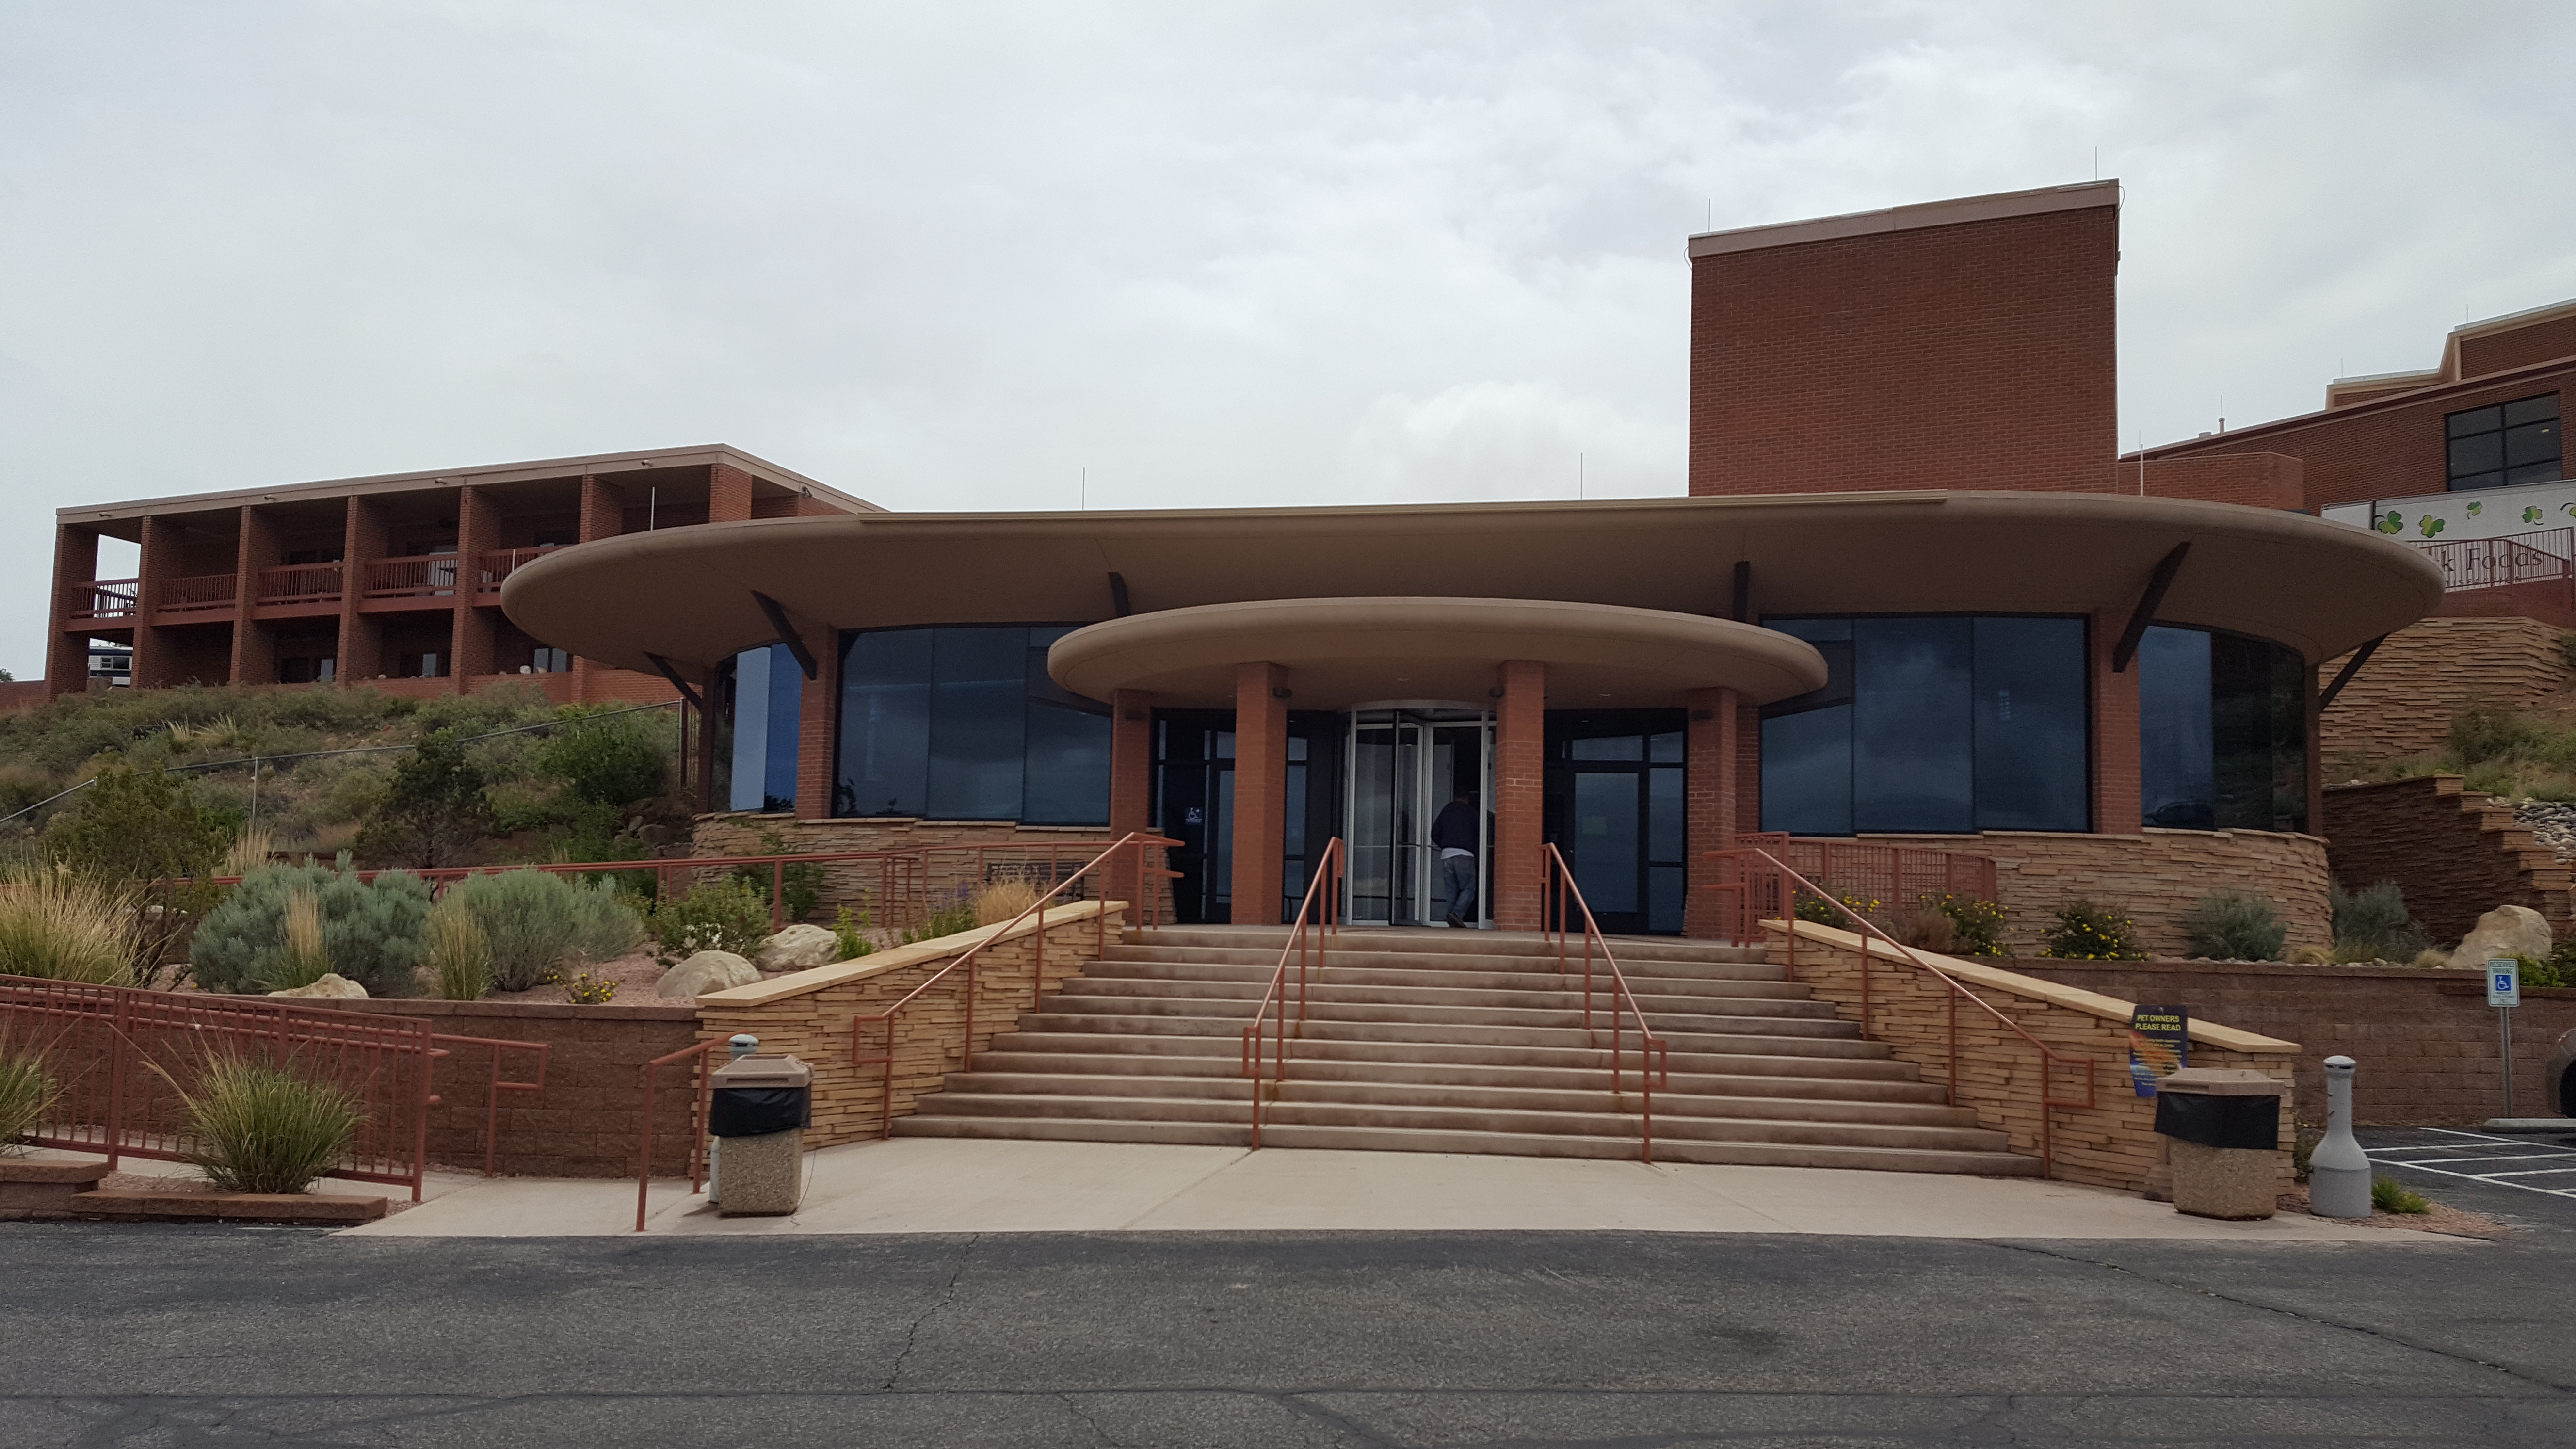 The Meteor Crater Visitor Center in Arizona.